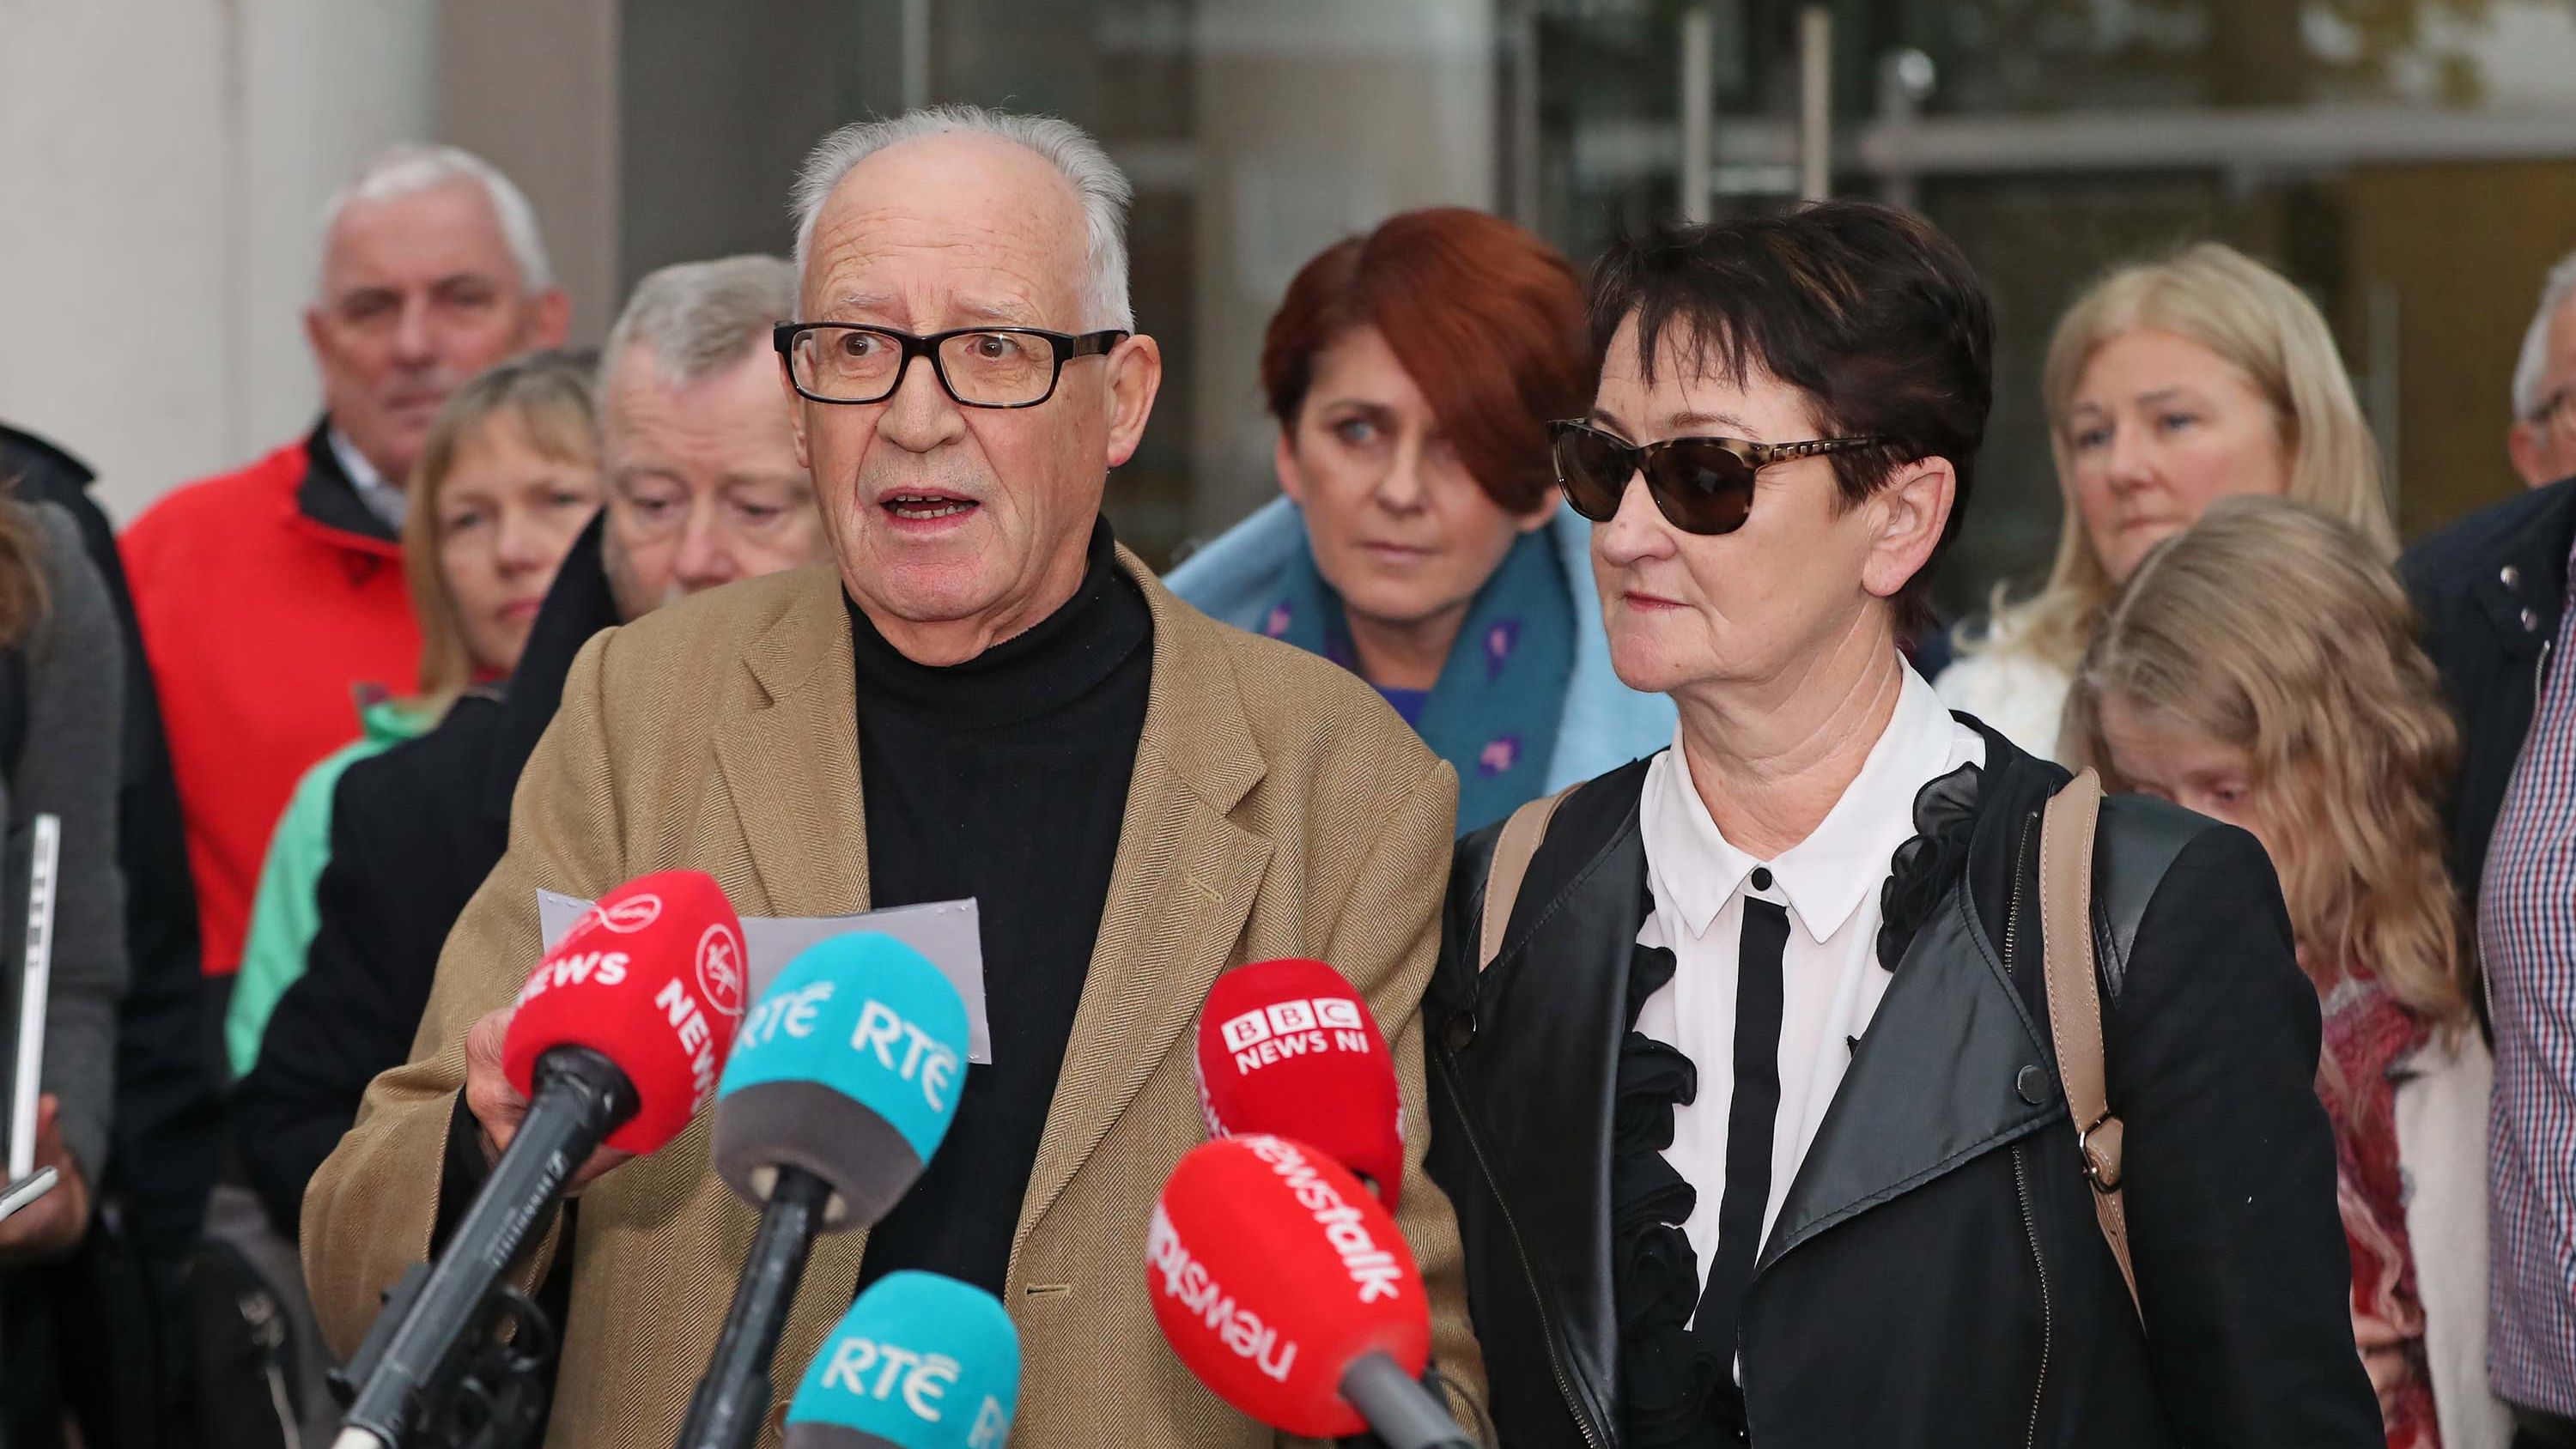 Patrick and Geraldine Kriegel, Ana's parents, spoke to the media outside Dublin's Central Criminal Court on Tuesday.